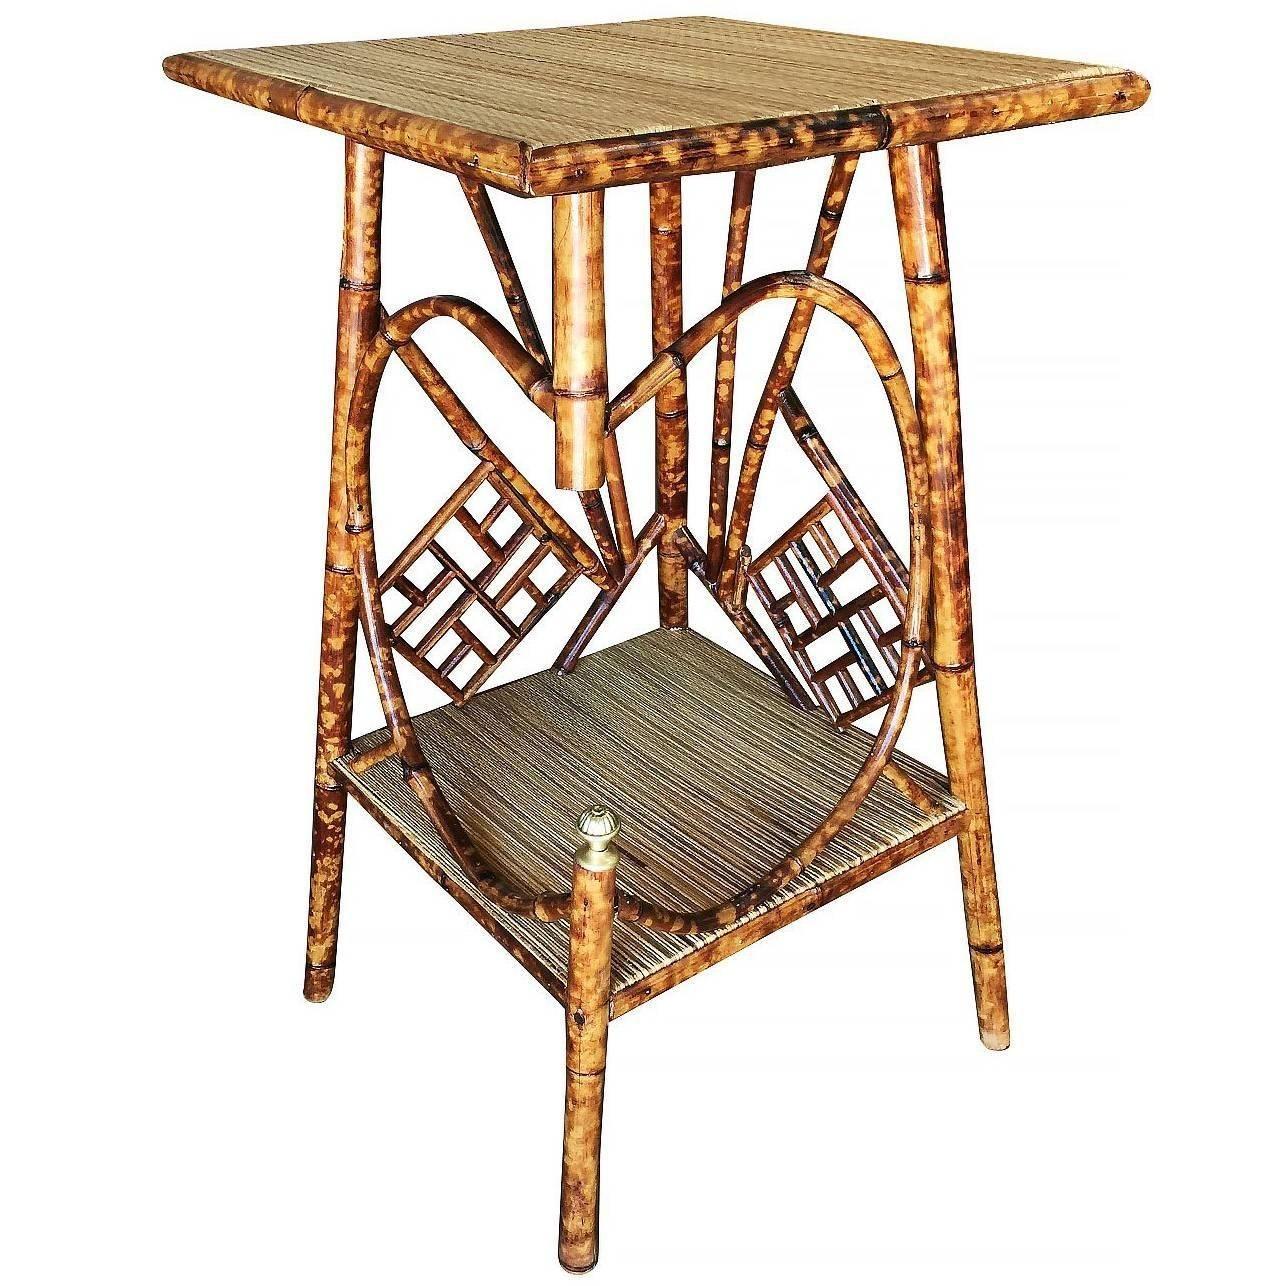 Restored Aesthetic Movement Tiger Tortoise Bamboo Pedestal Side Table In Excellent Condition For Sale In Van Nuys, CA